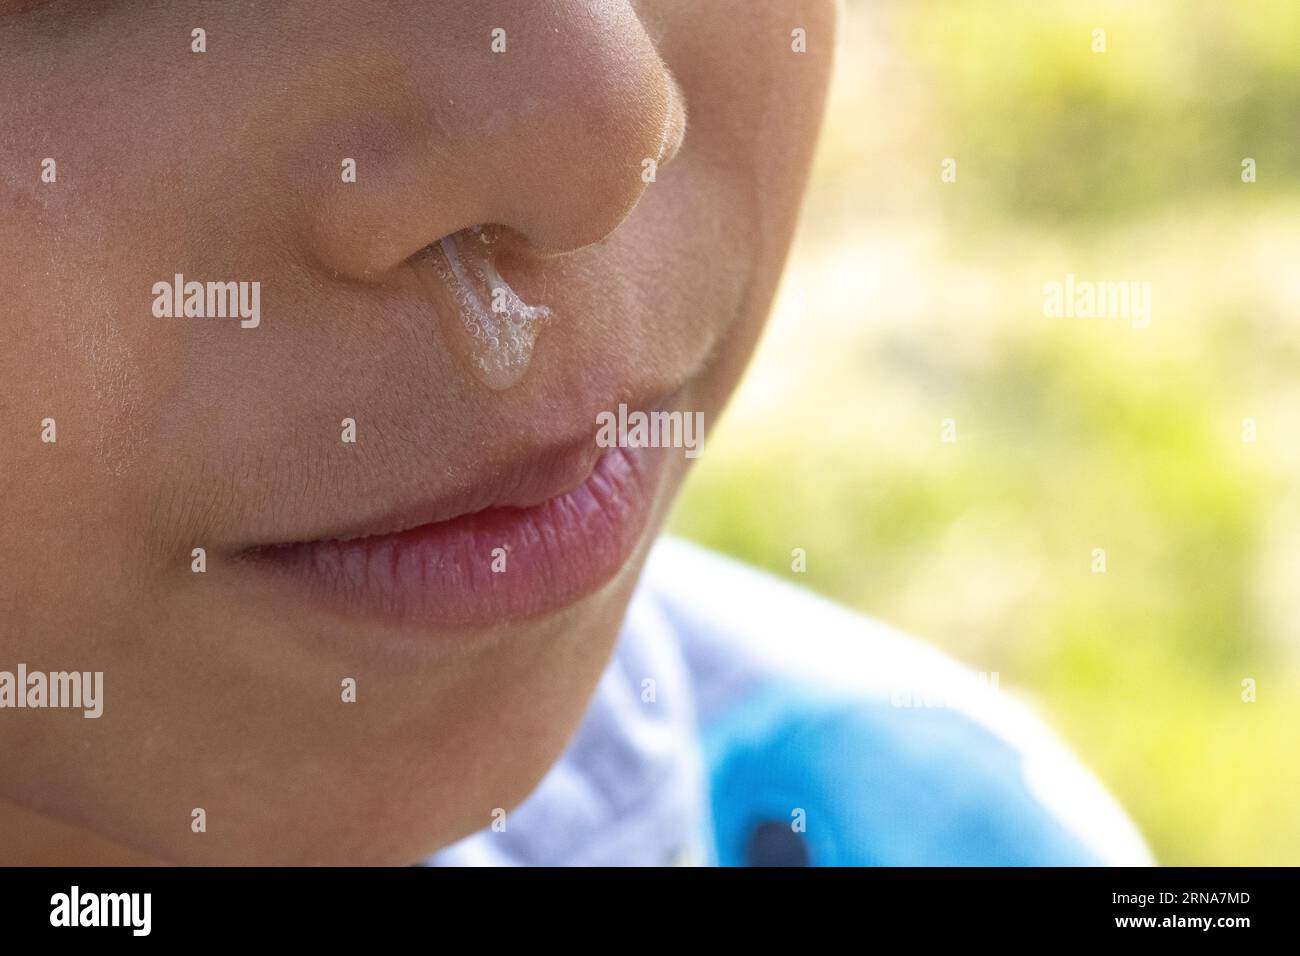 Details of a child's nose with mucus running down. Mucus due to cold or allergic rhinitis. Sick child not blowing his nose Stock Photo